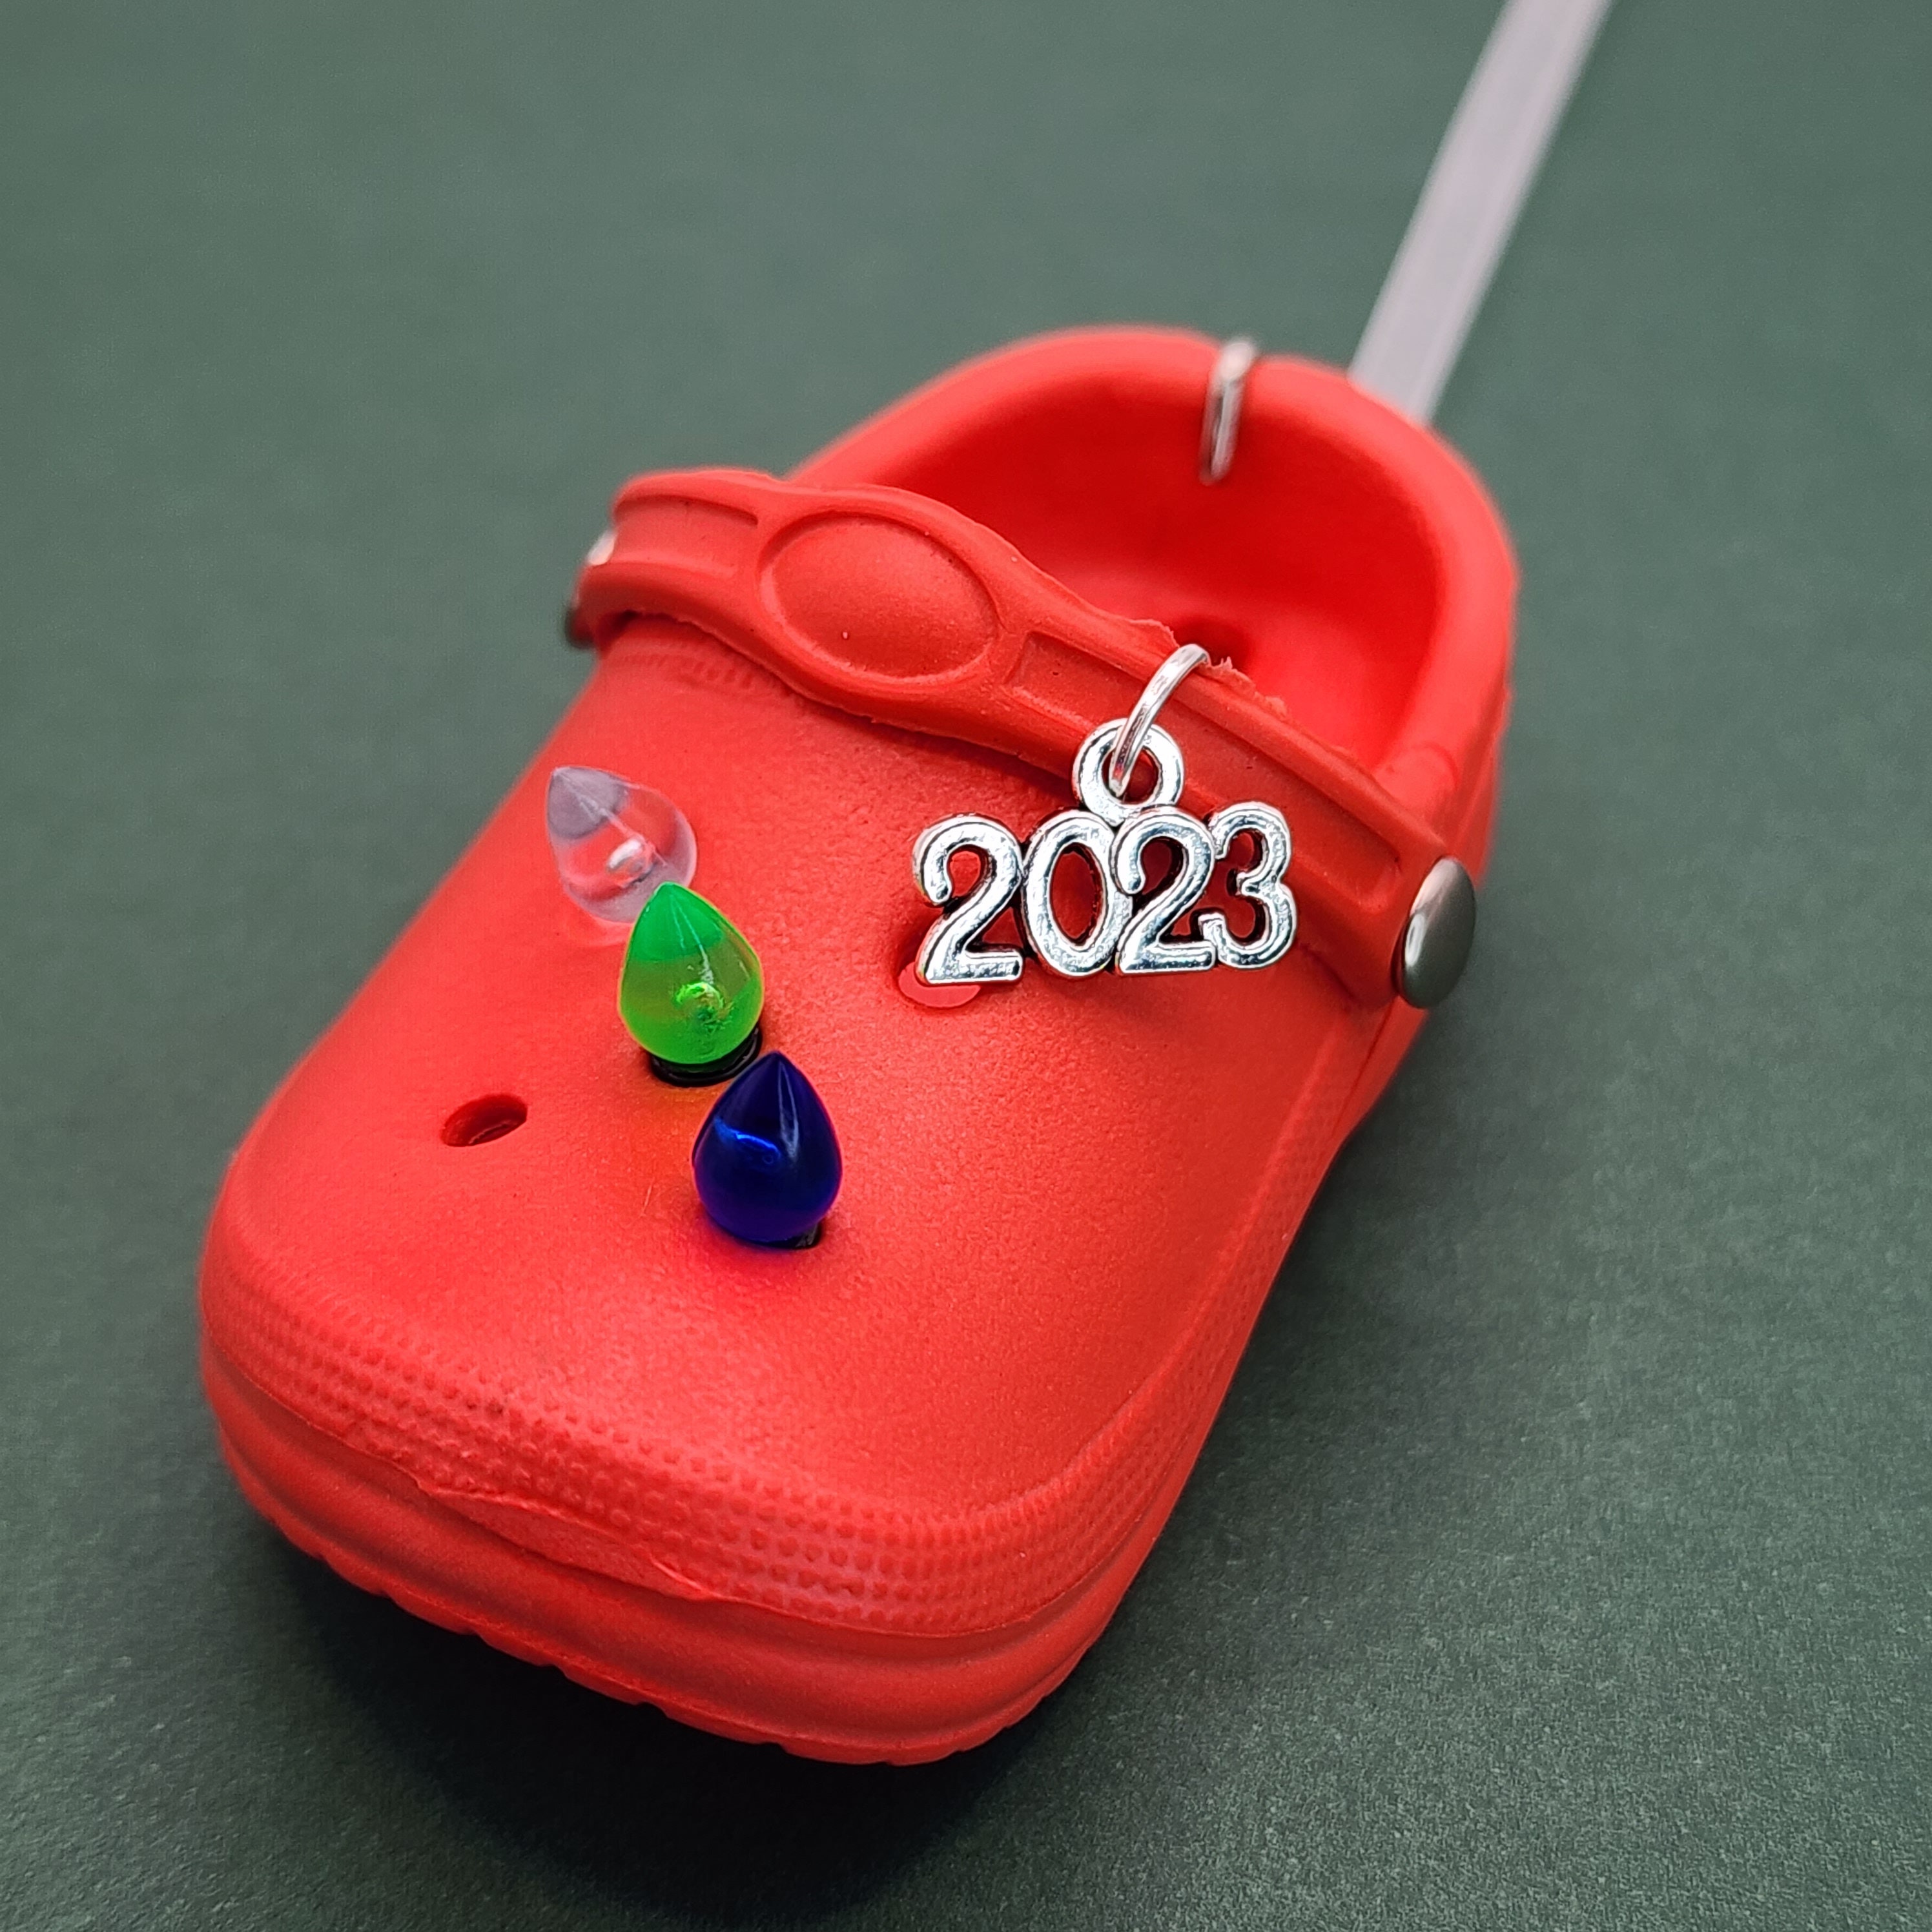 Pick Any Combo 4 8 12 or 16 Charms Starting at 5.99! Croc Popular Shoe Charms Gift or Individually